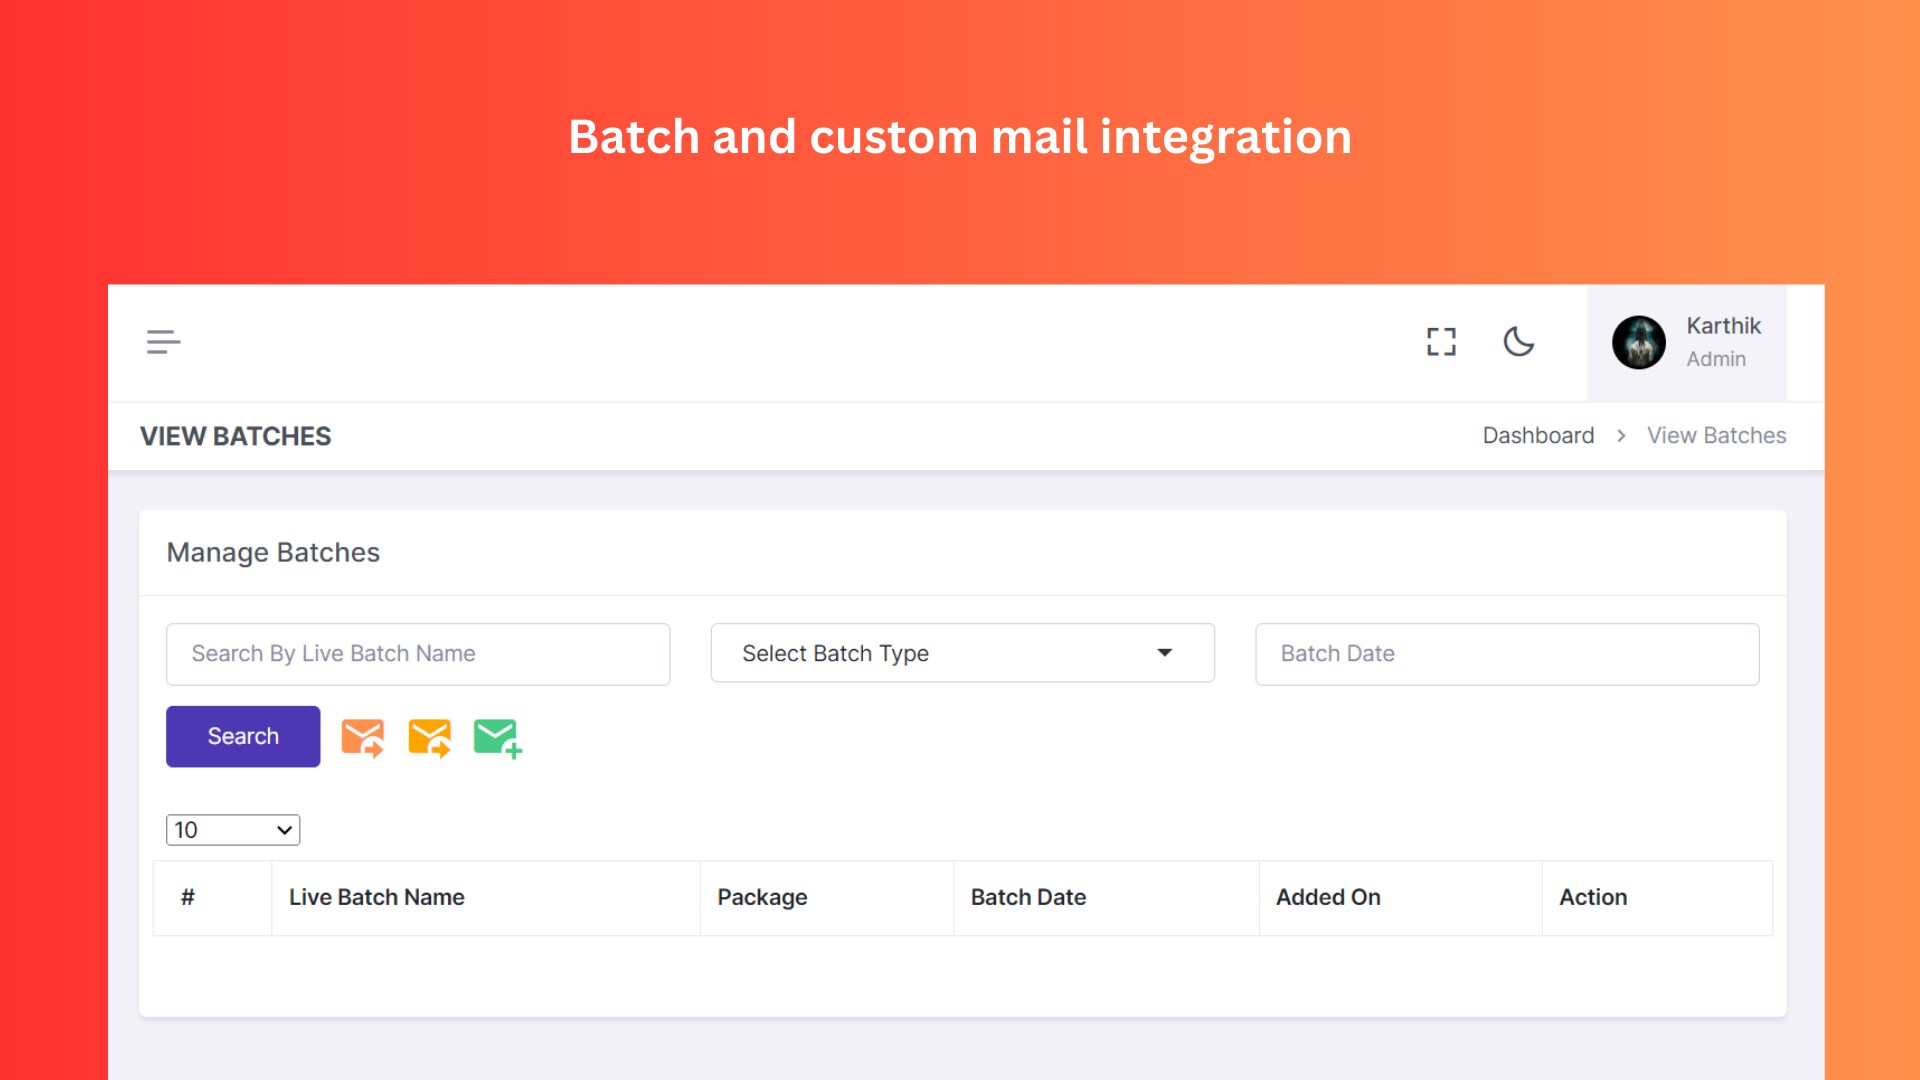 Feature to create and manage batches, with the additional capability to send custom emails to specific batches.